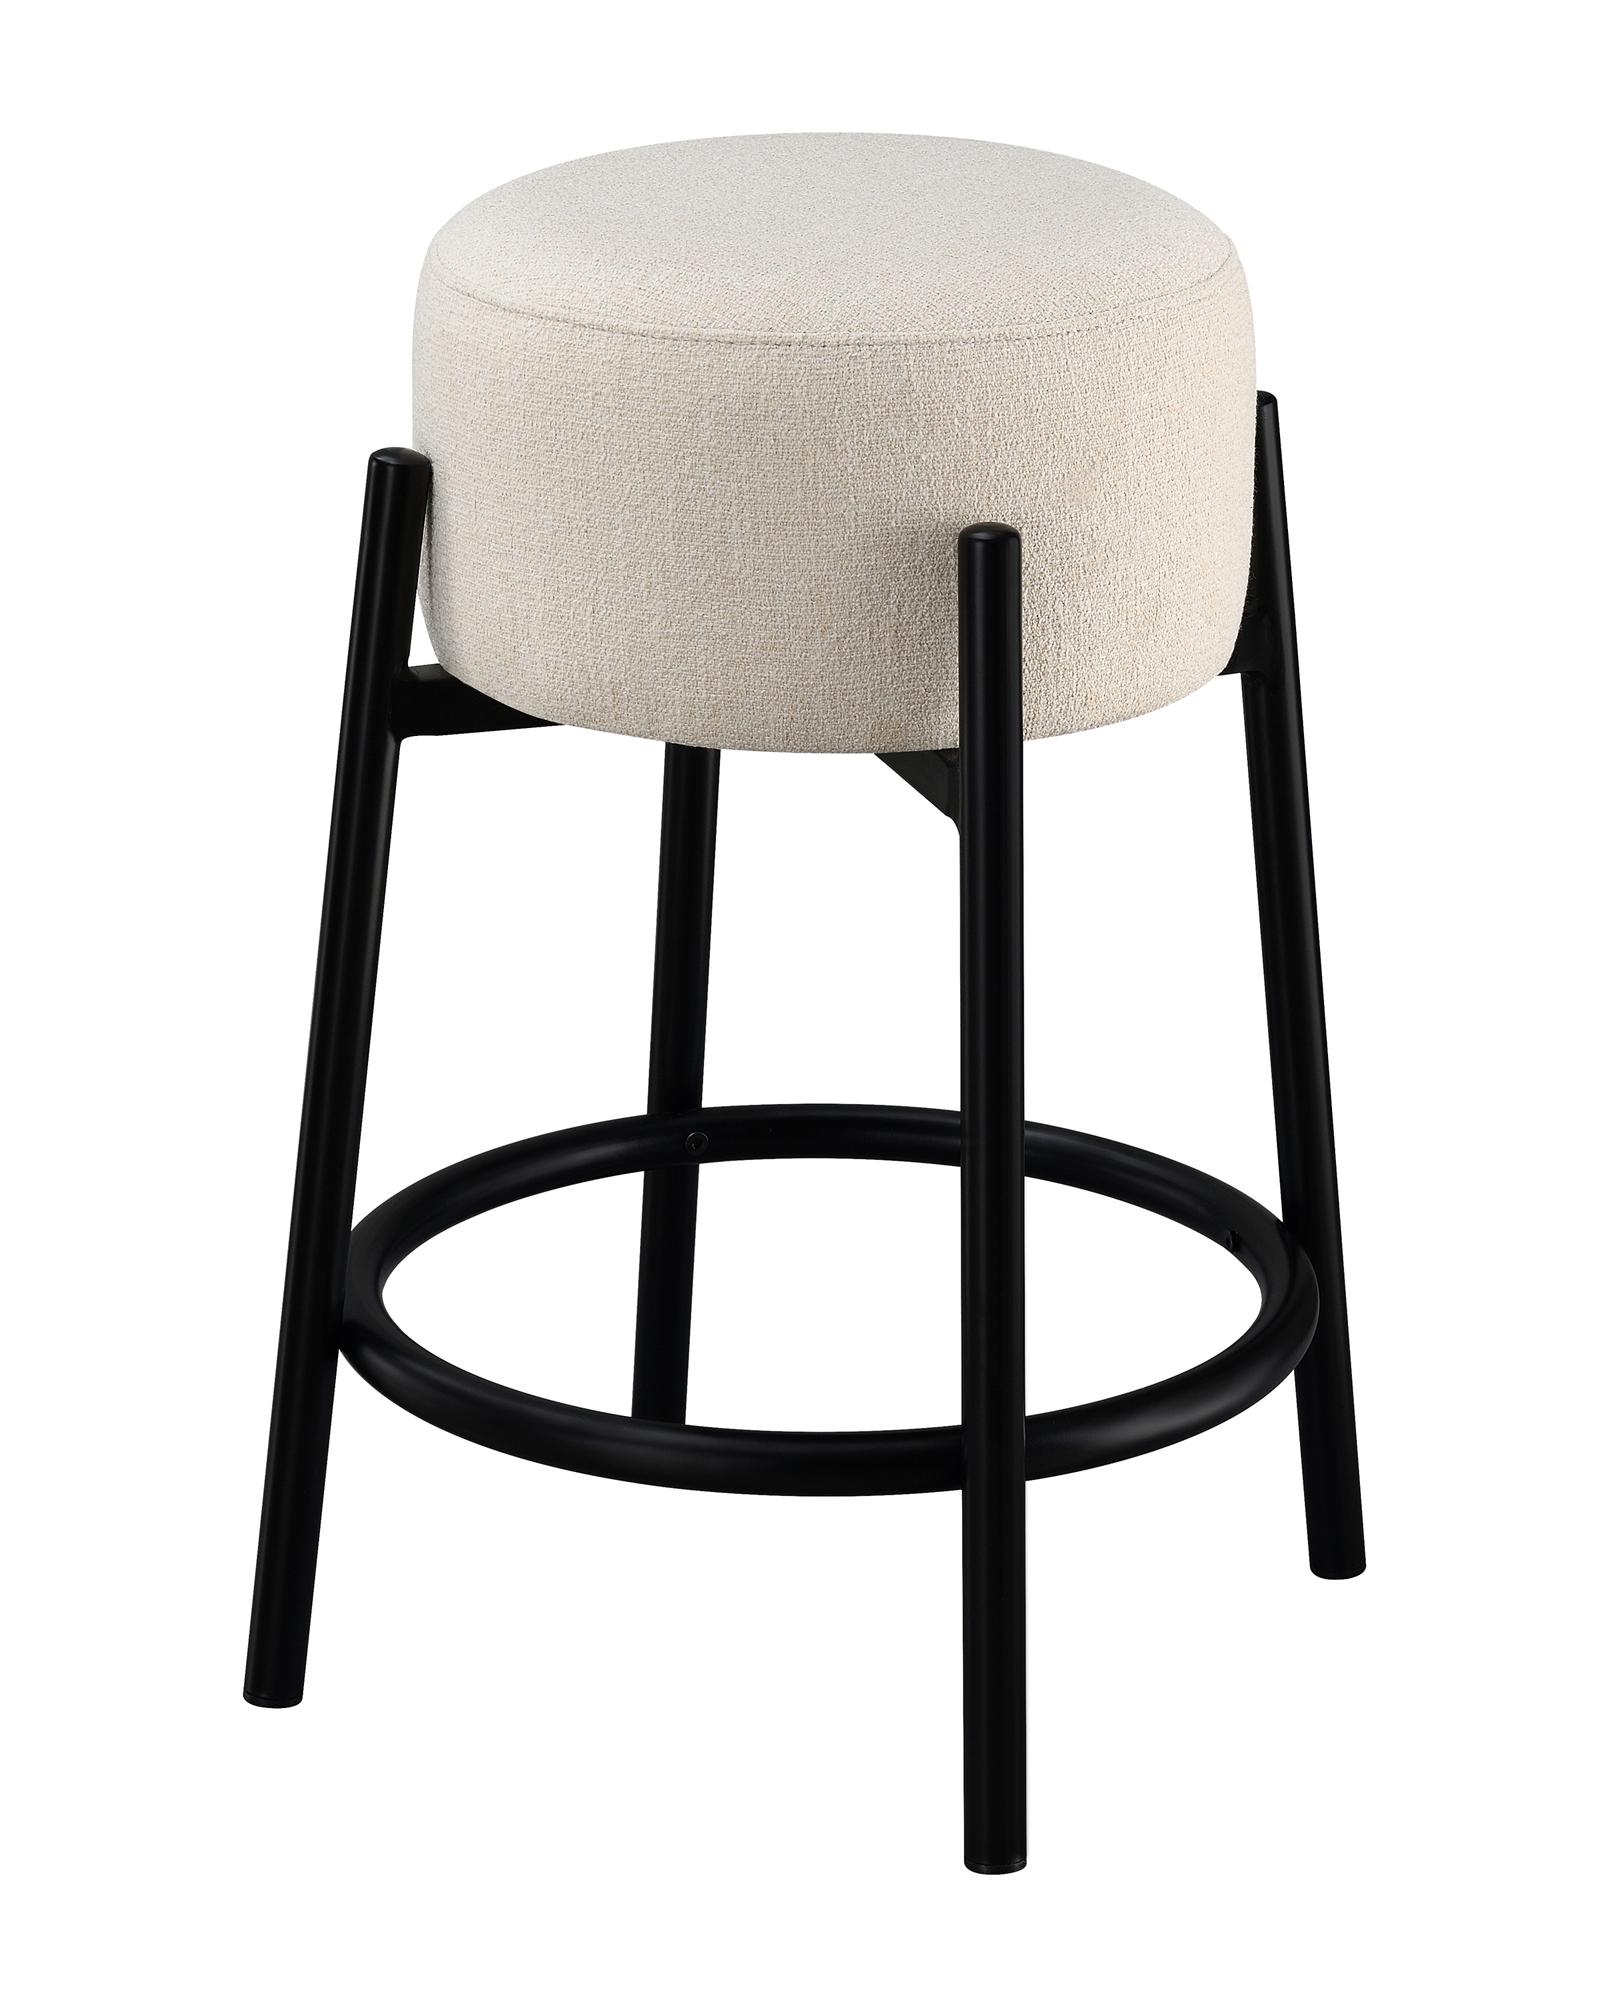 Contemporary Counter Height Stool Set 182175 182175 in White, Black Fabric